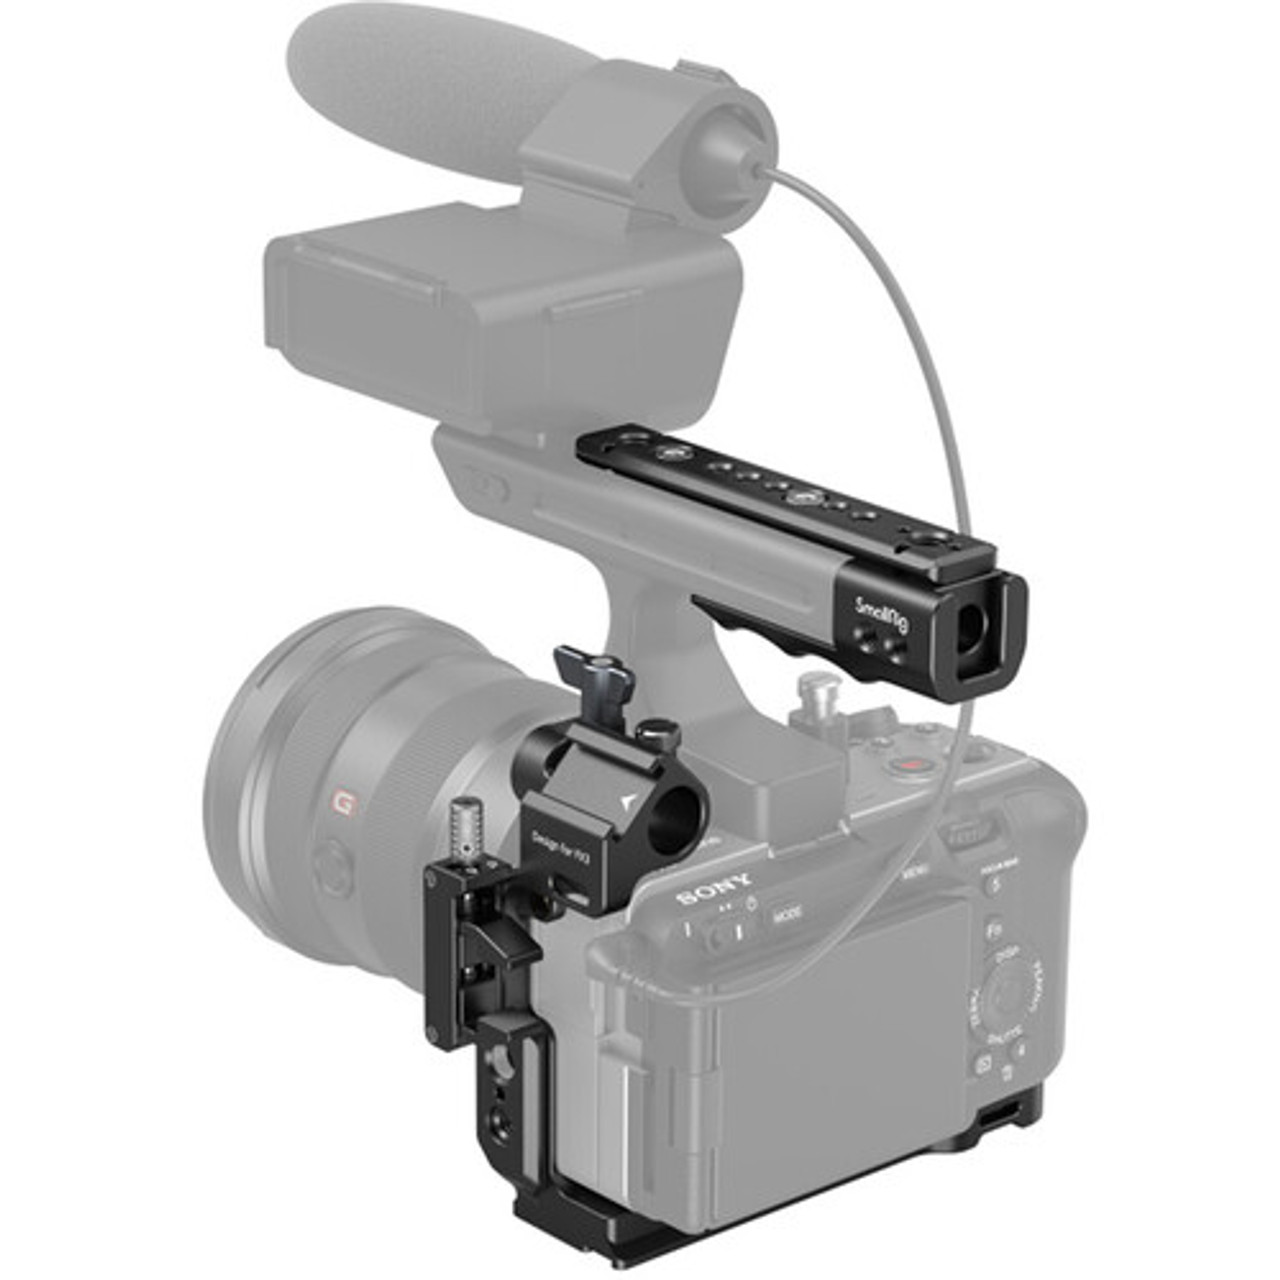 SmallRig Top Handle with ARRI-Style Anti-Twist Mount by SmallRig